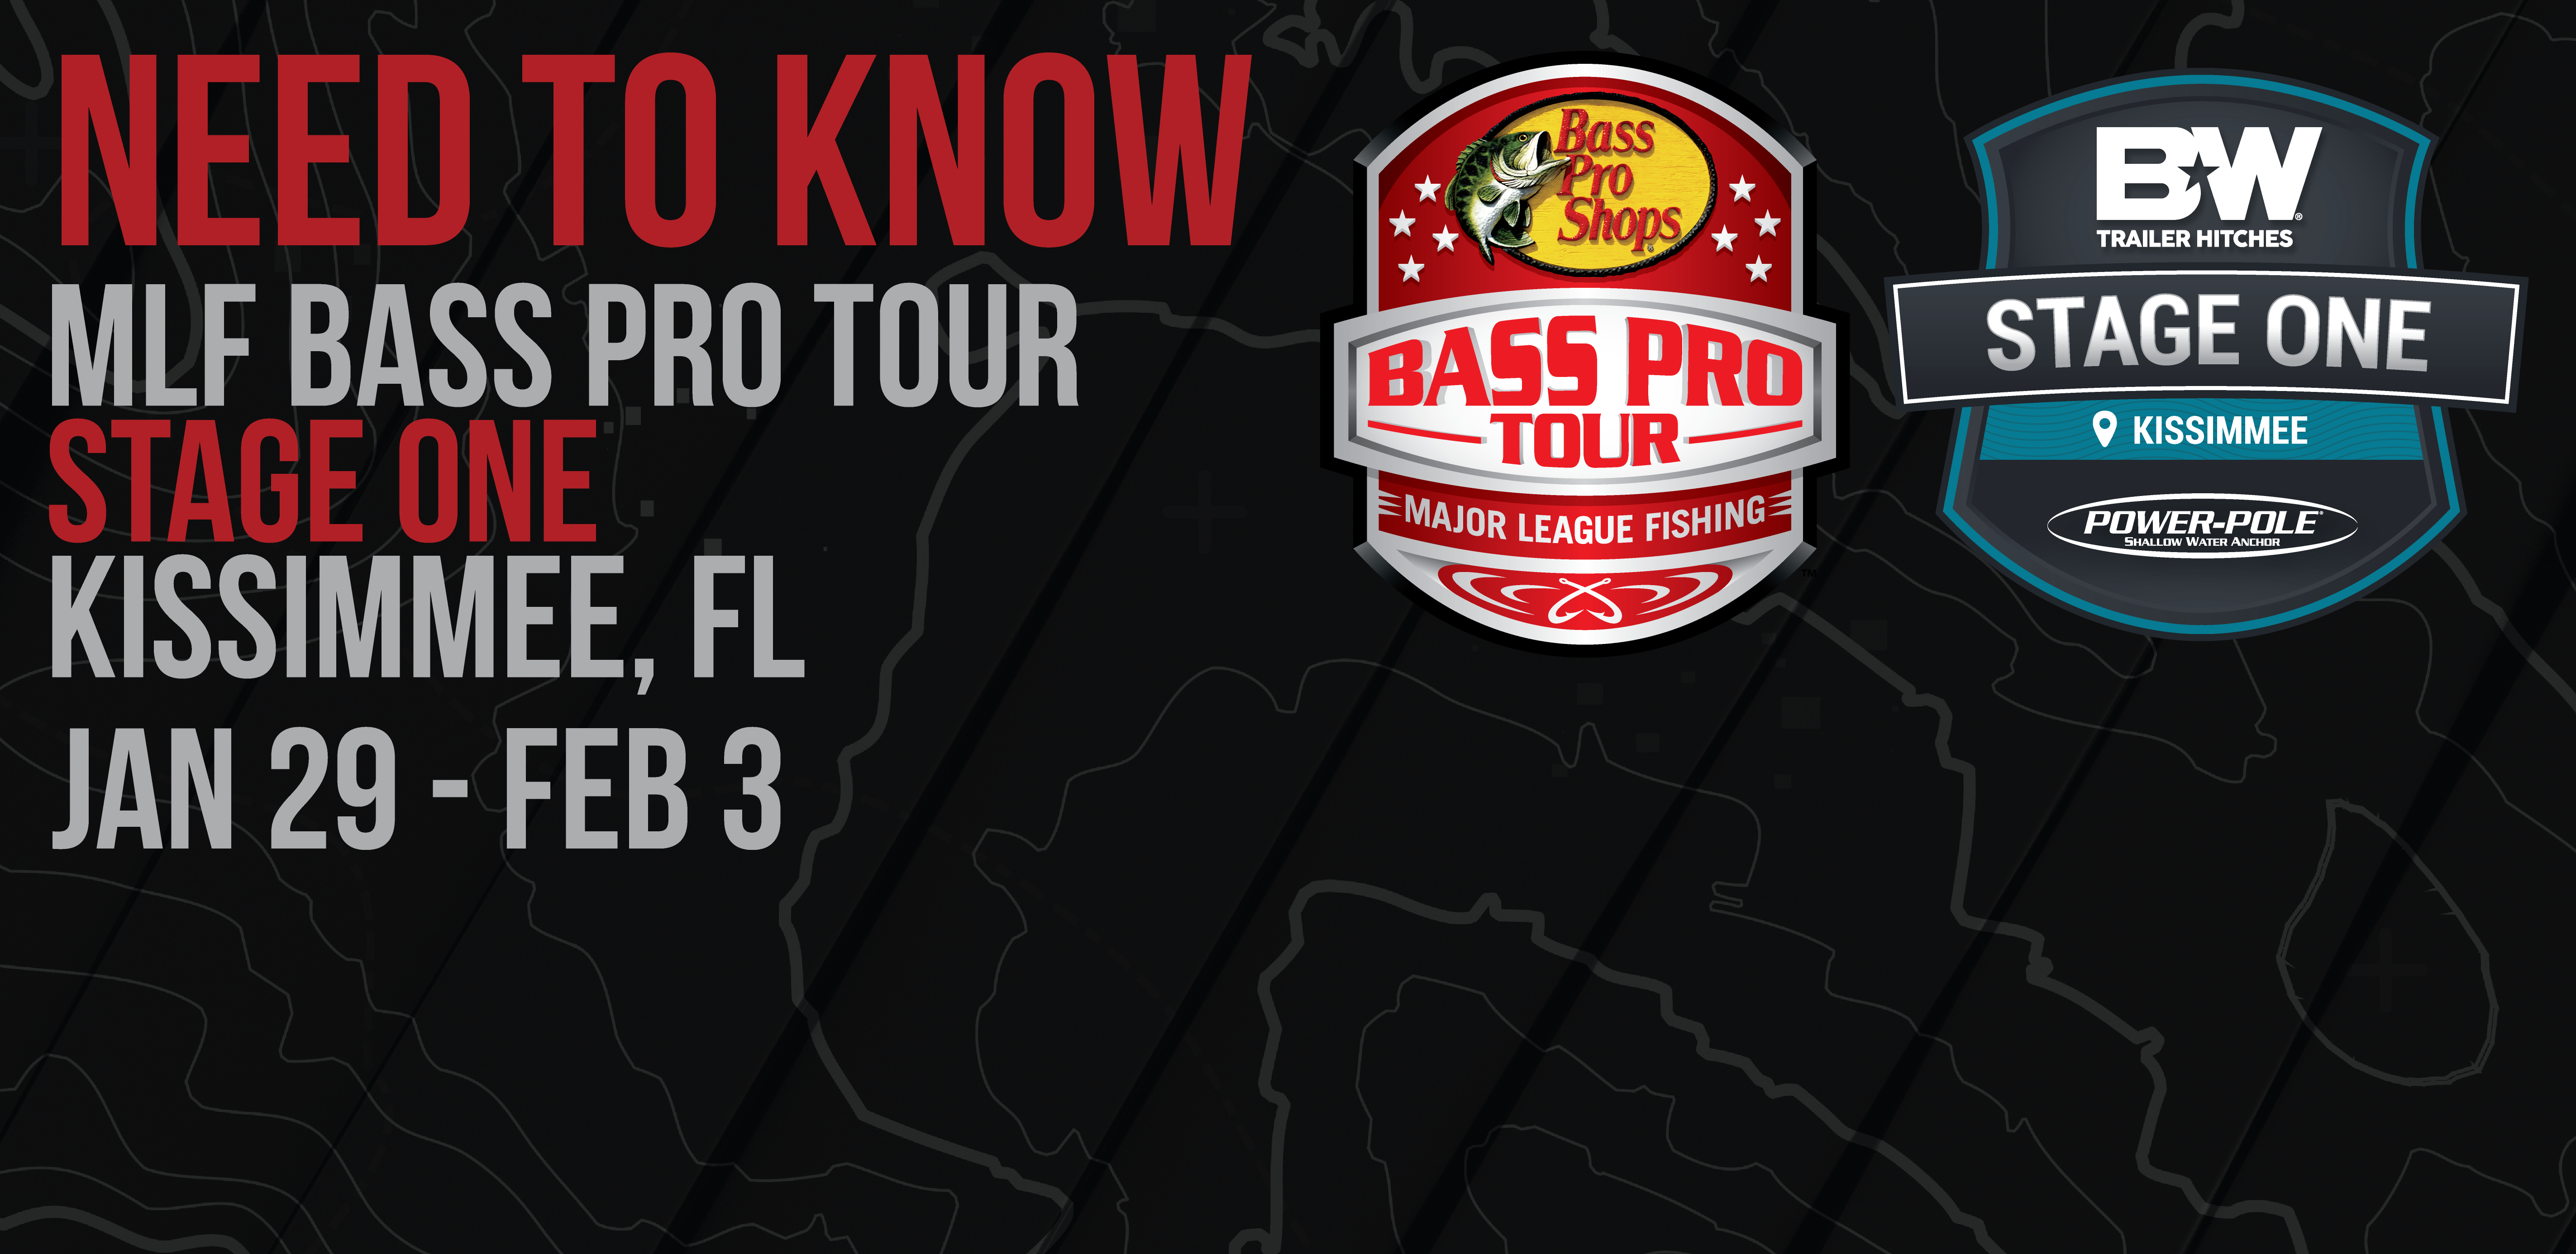 NEED TO KNOW: How to View, Attend Bass Pro Tour Stage One in